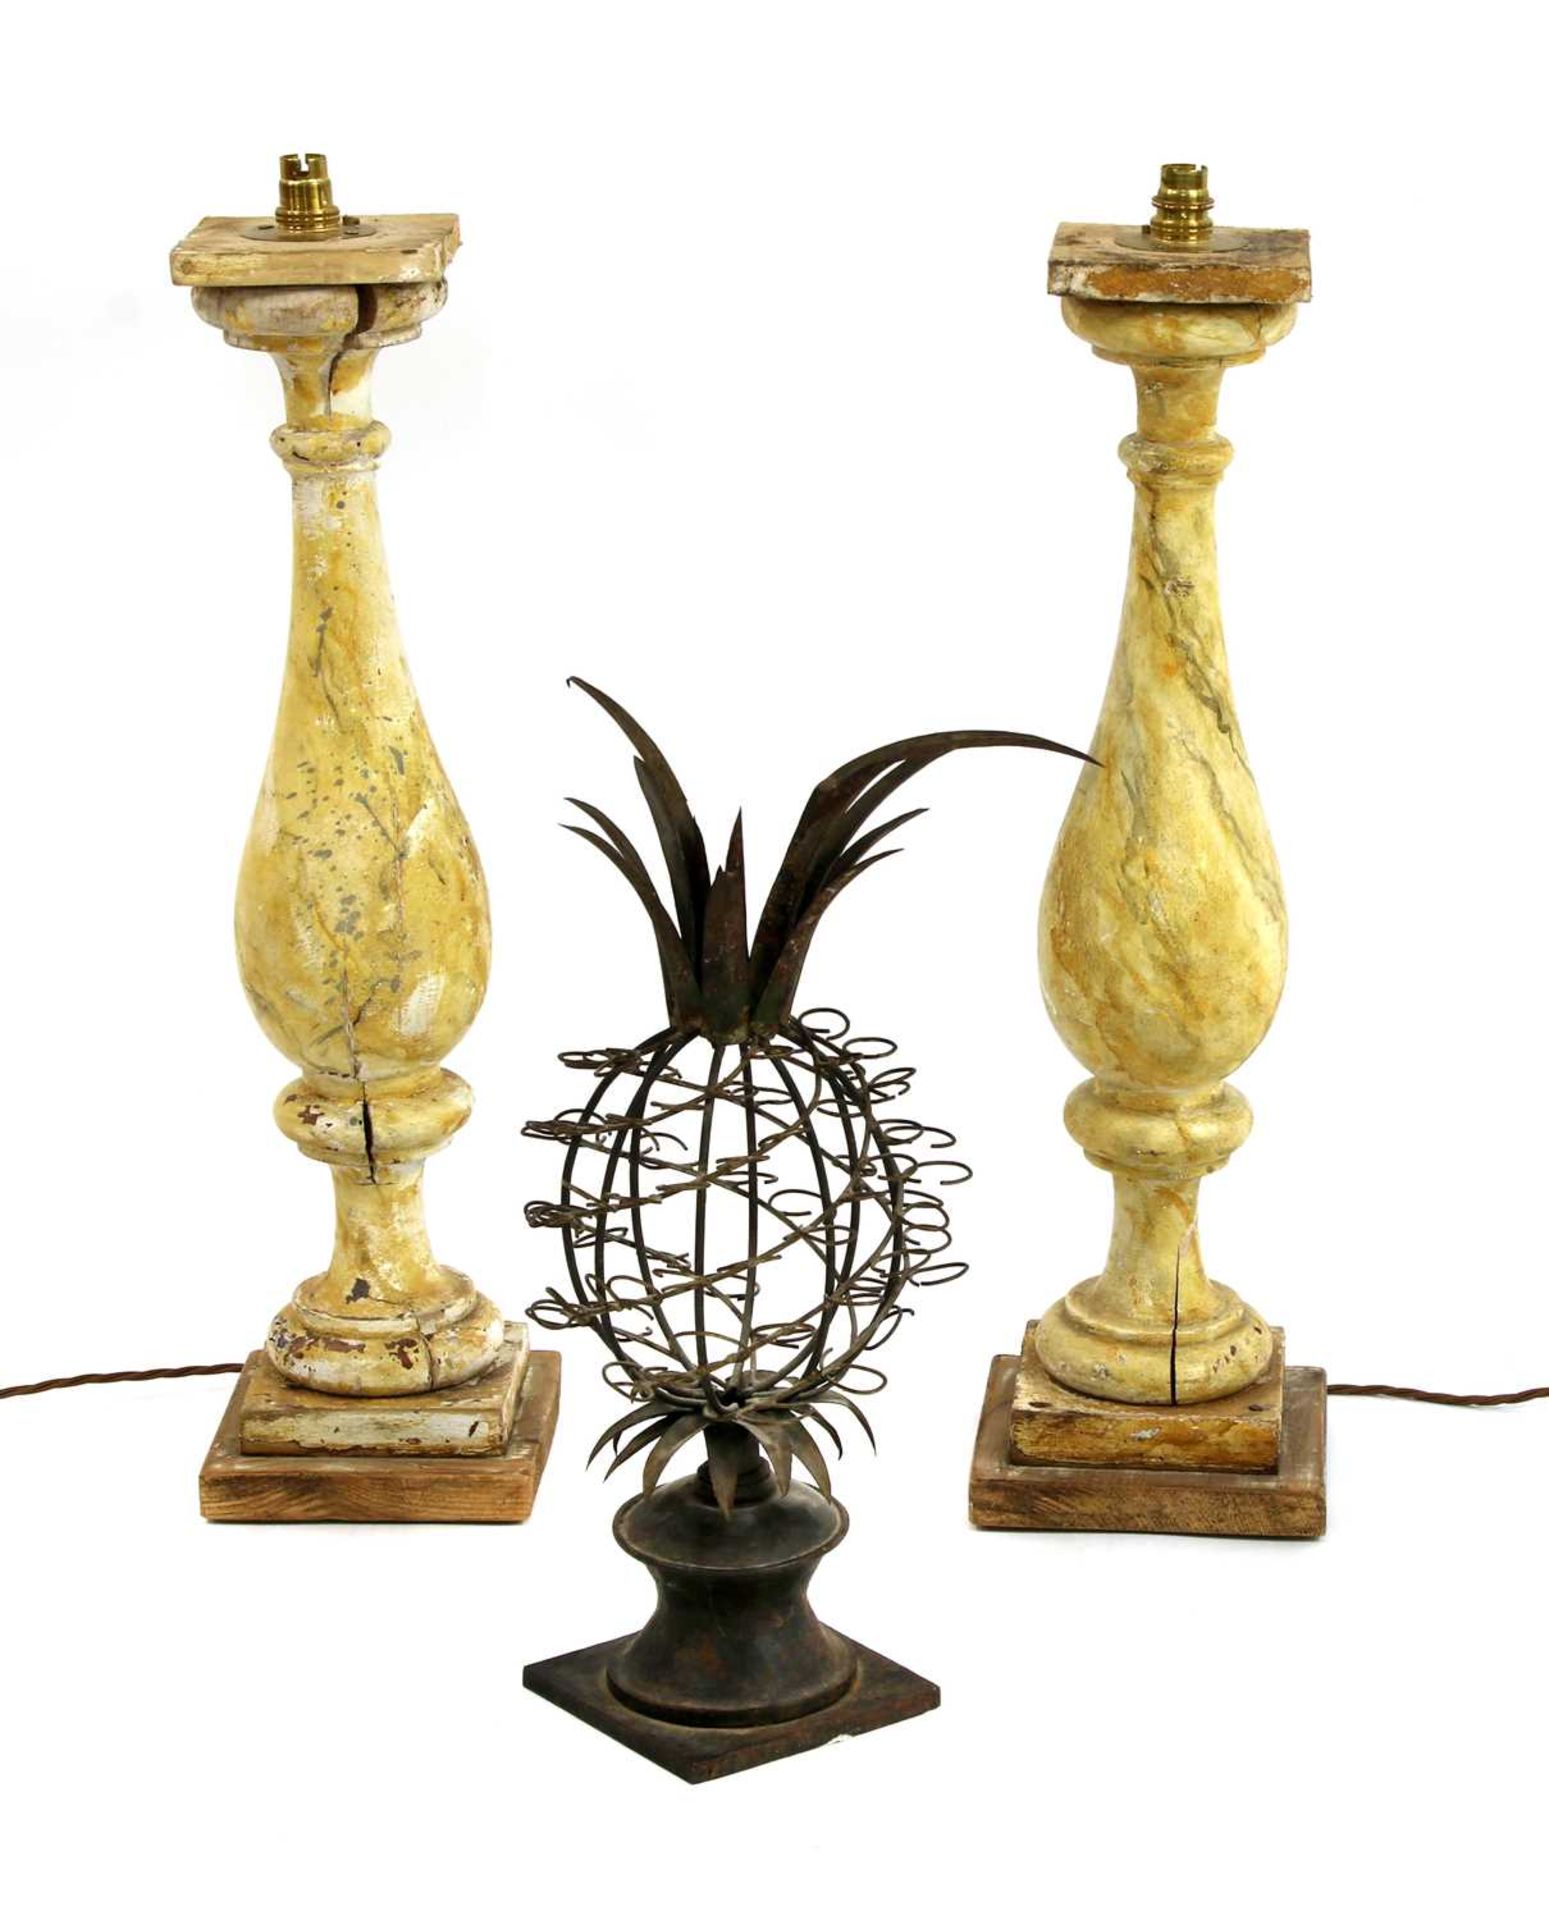 A pair of painted wooden balusters or candlesticks